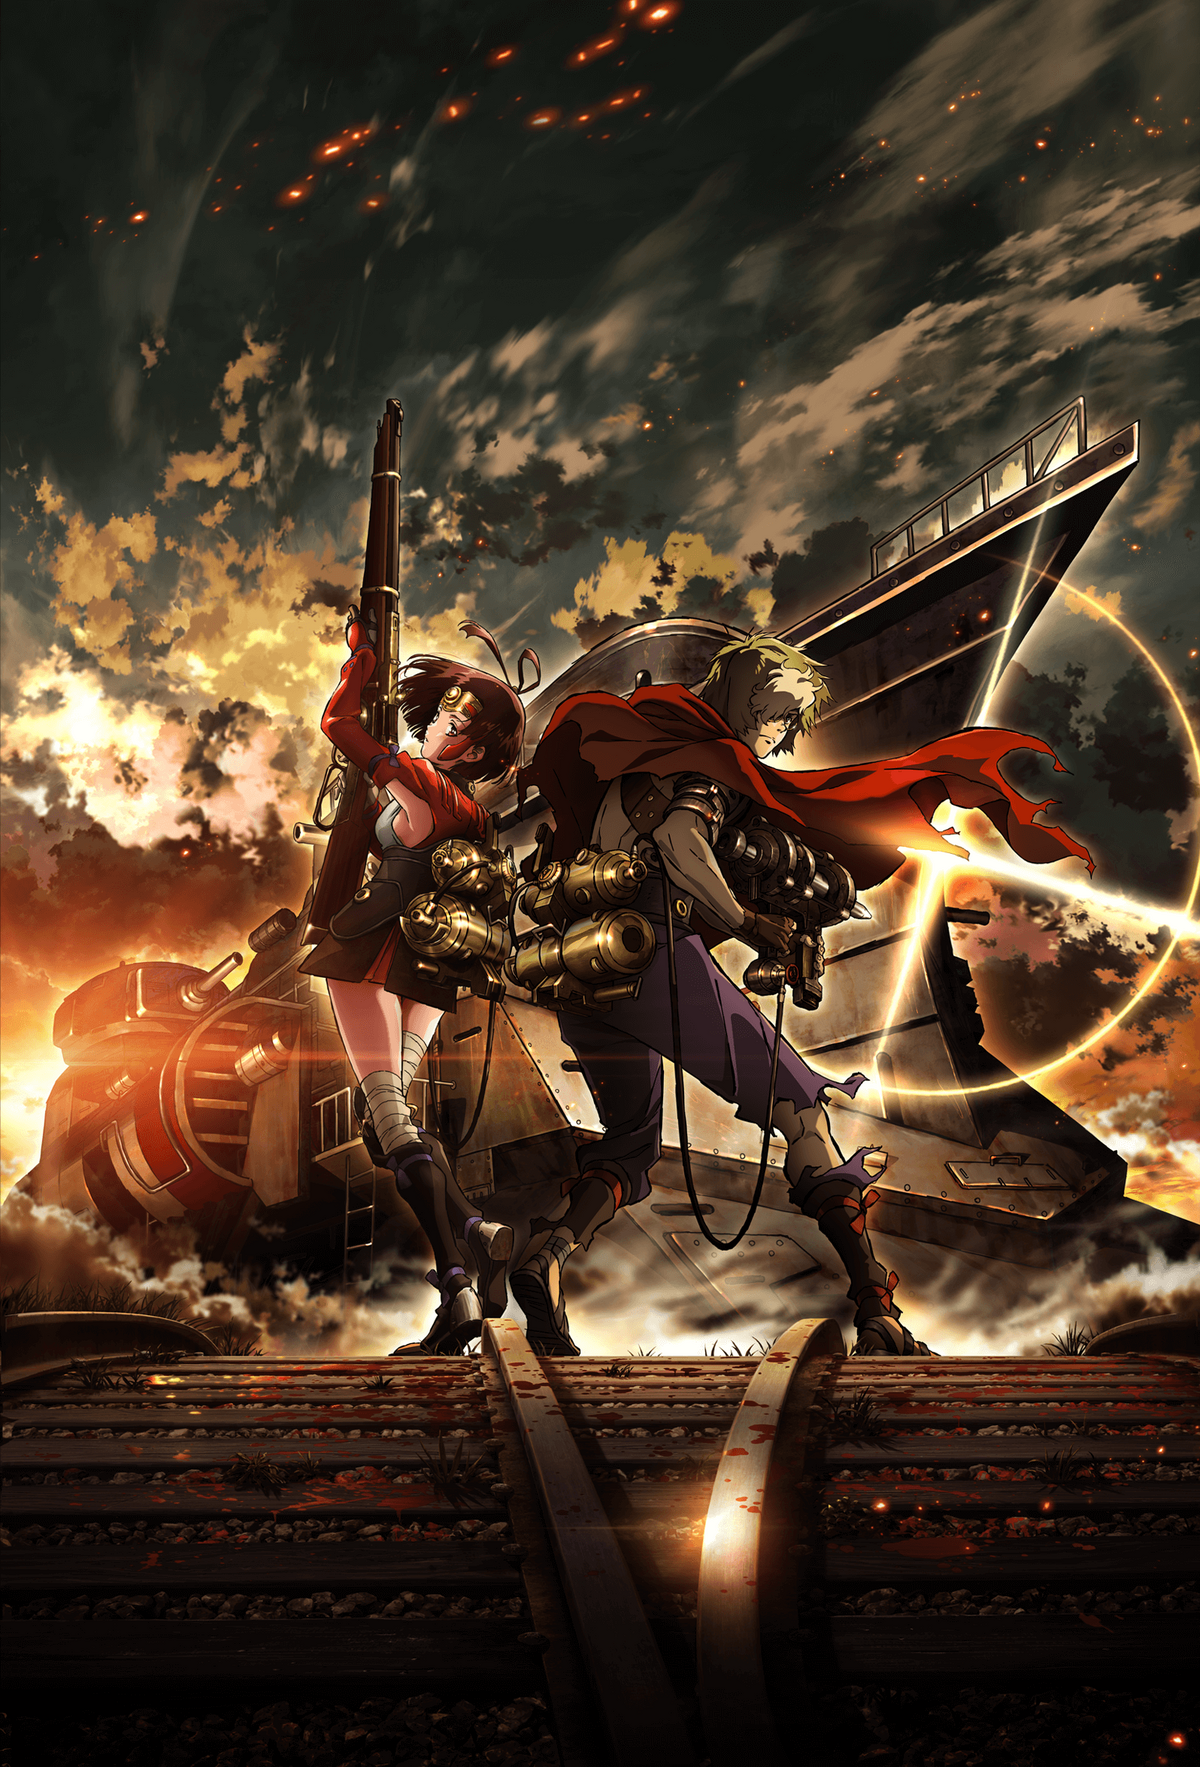 Kabaneri of the Iron Fortress Ep. 6: The heart of the matter